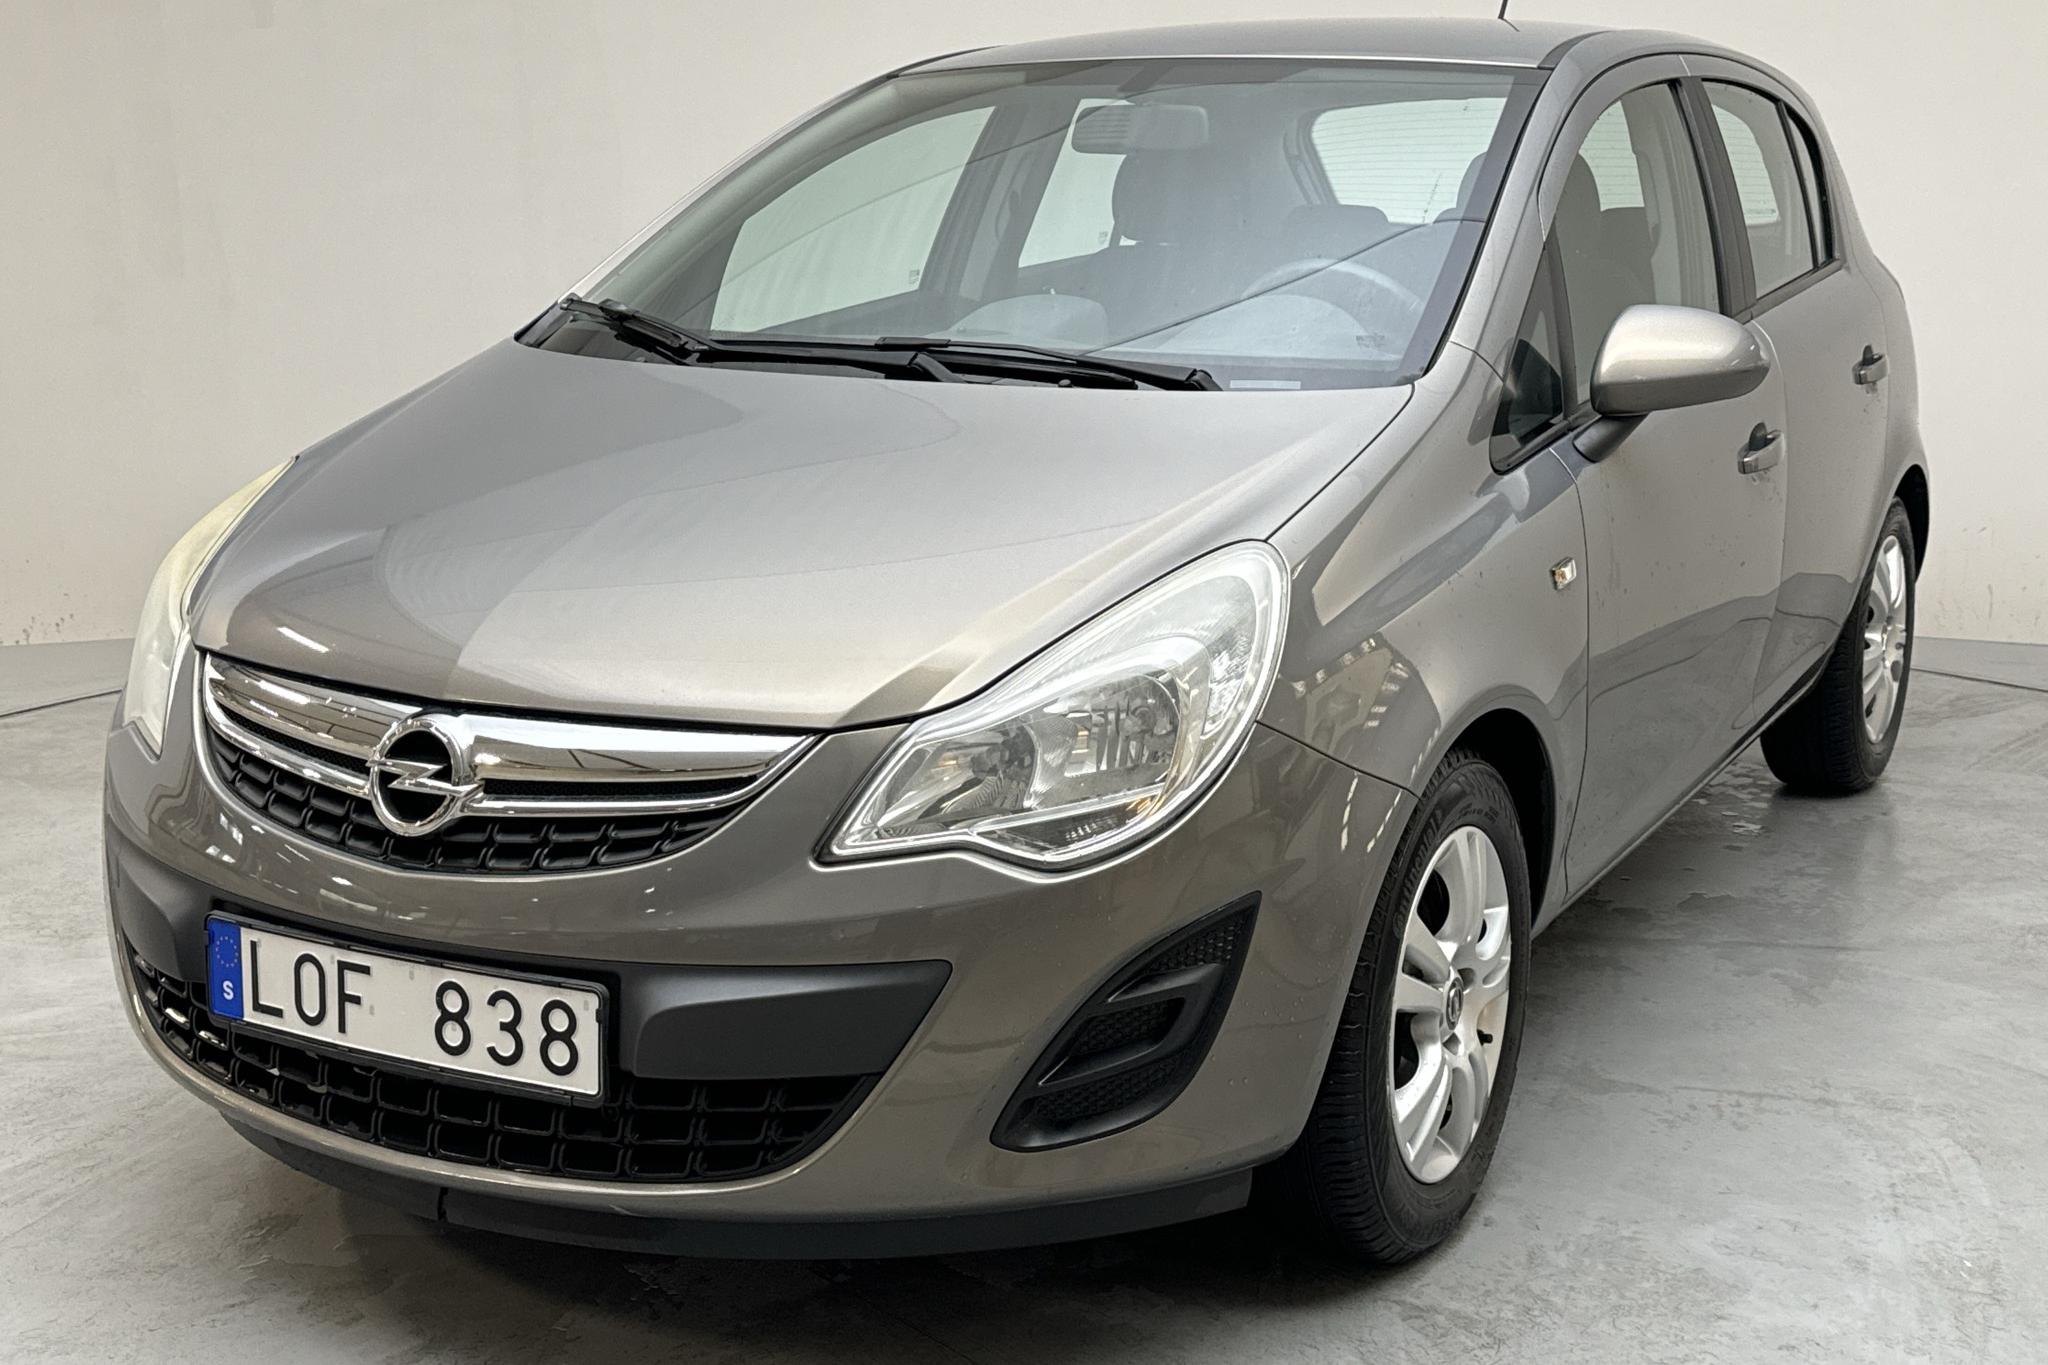 Opel Corsa 1.2 Twinport 5dr (85hk) - 27 810 km - Automatic - brown - 2011